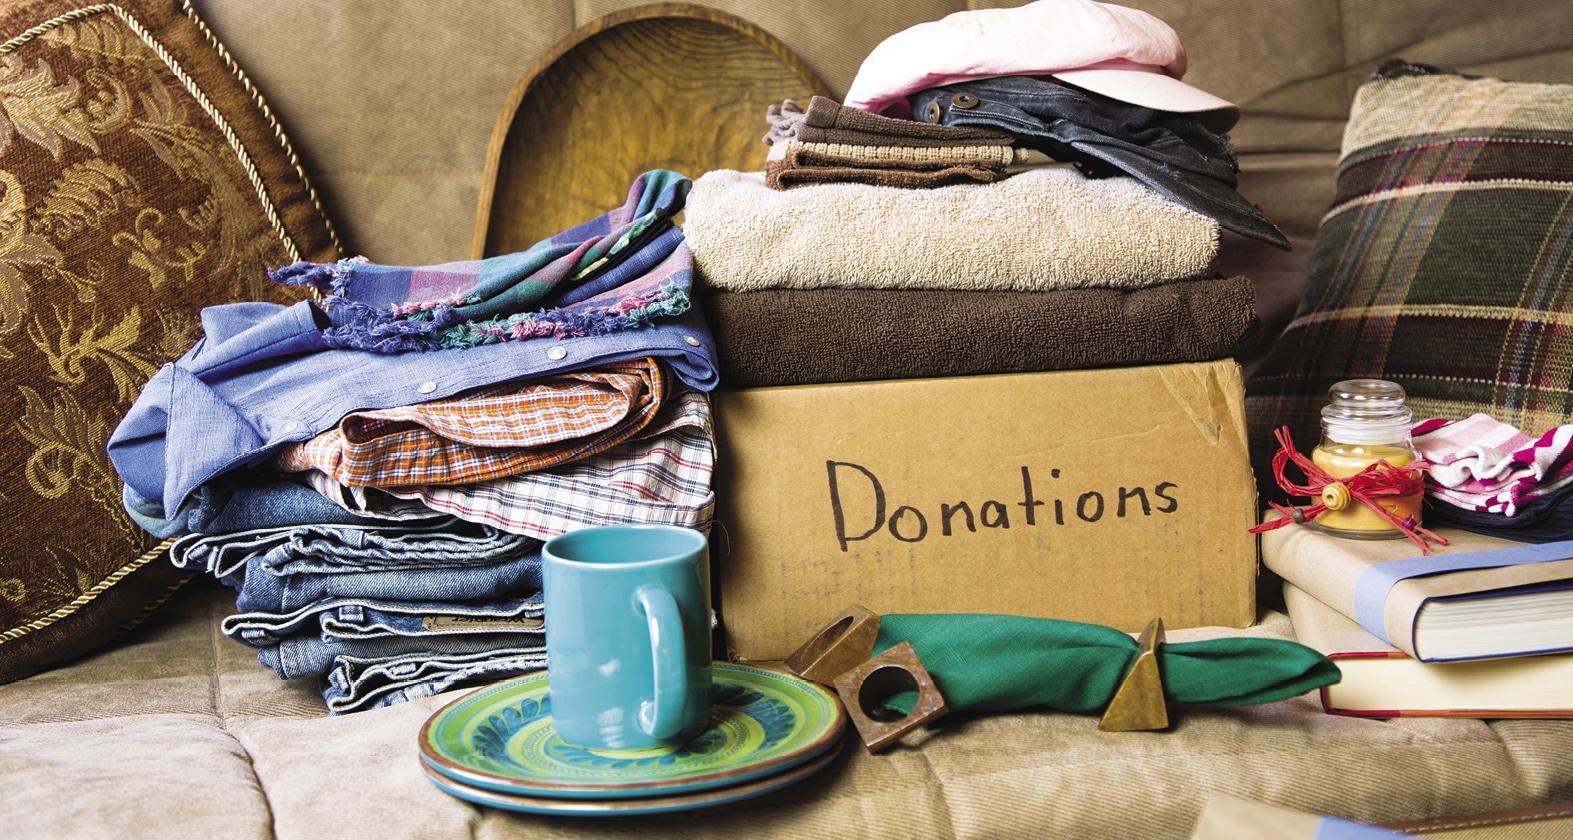 List of items to be donated sitting on a couch